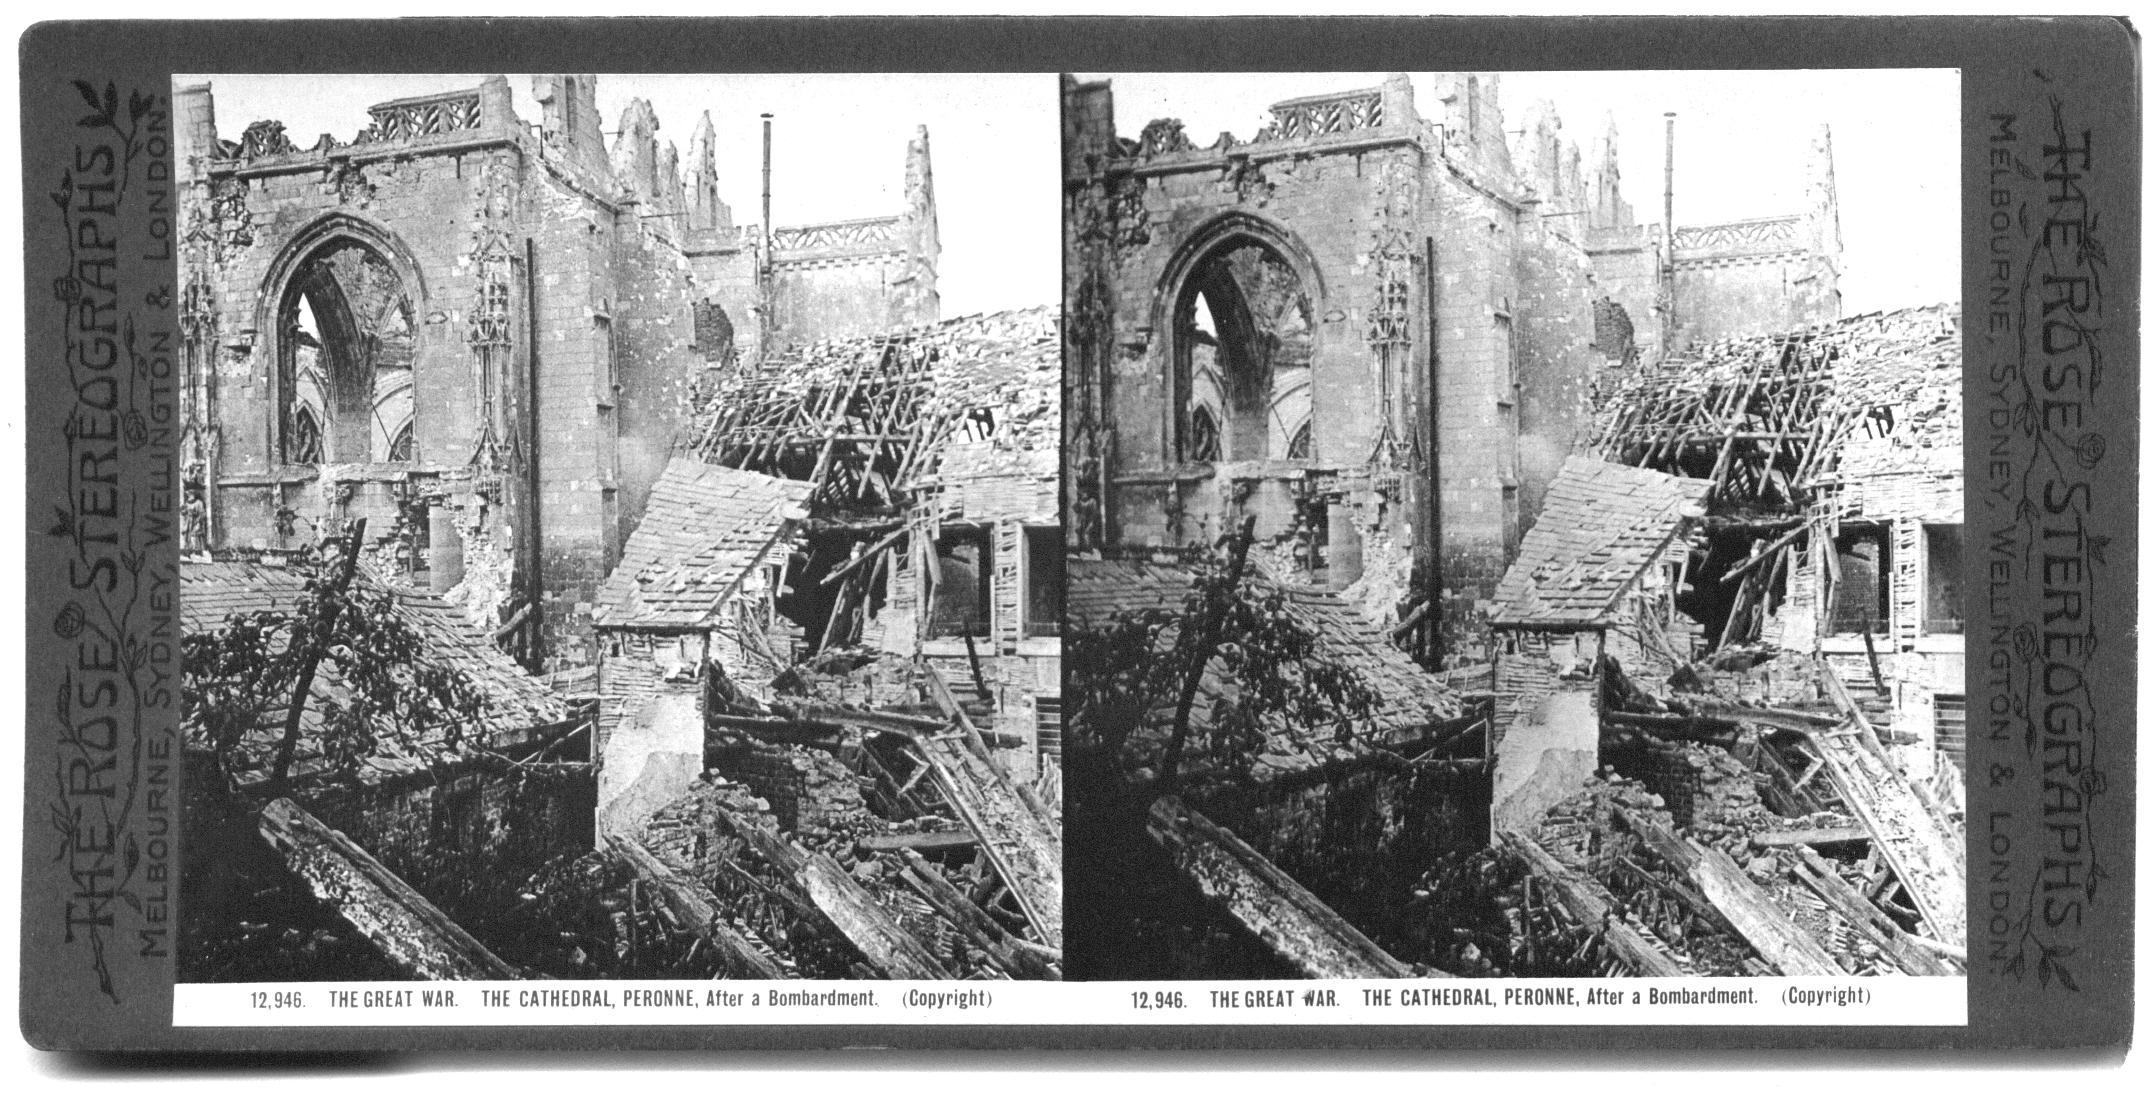 THE GREAT WAR. THE CATHEDRAL, PERONNE, After a Bombardment